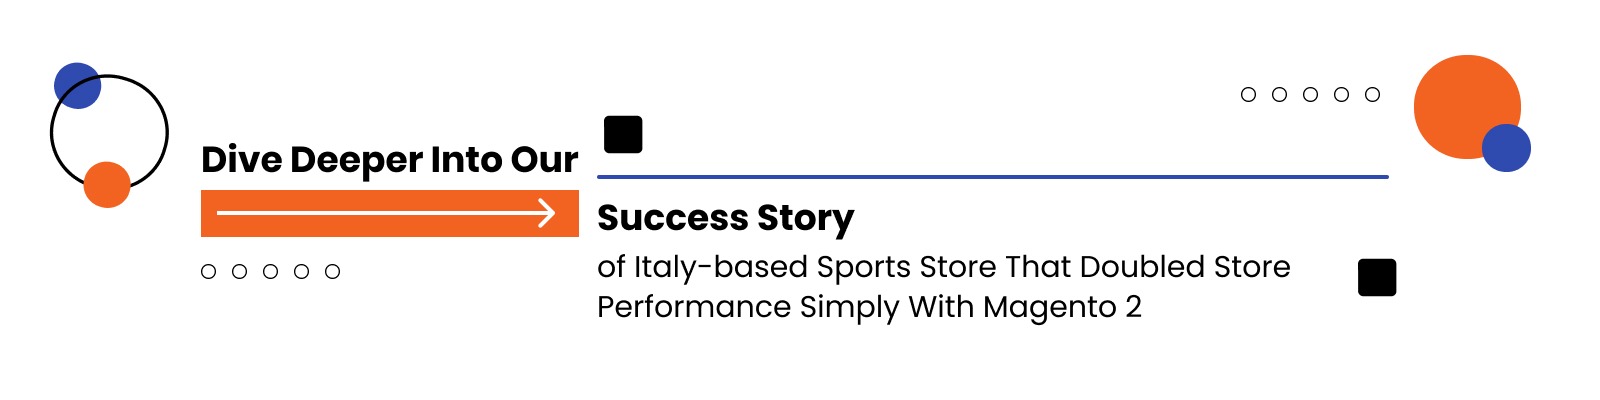 Success Story of Italy-based Sports Store That Doubled Store Performance Simply With Magento 2 - Magento Support Services